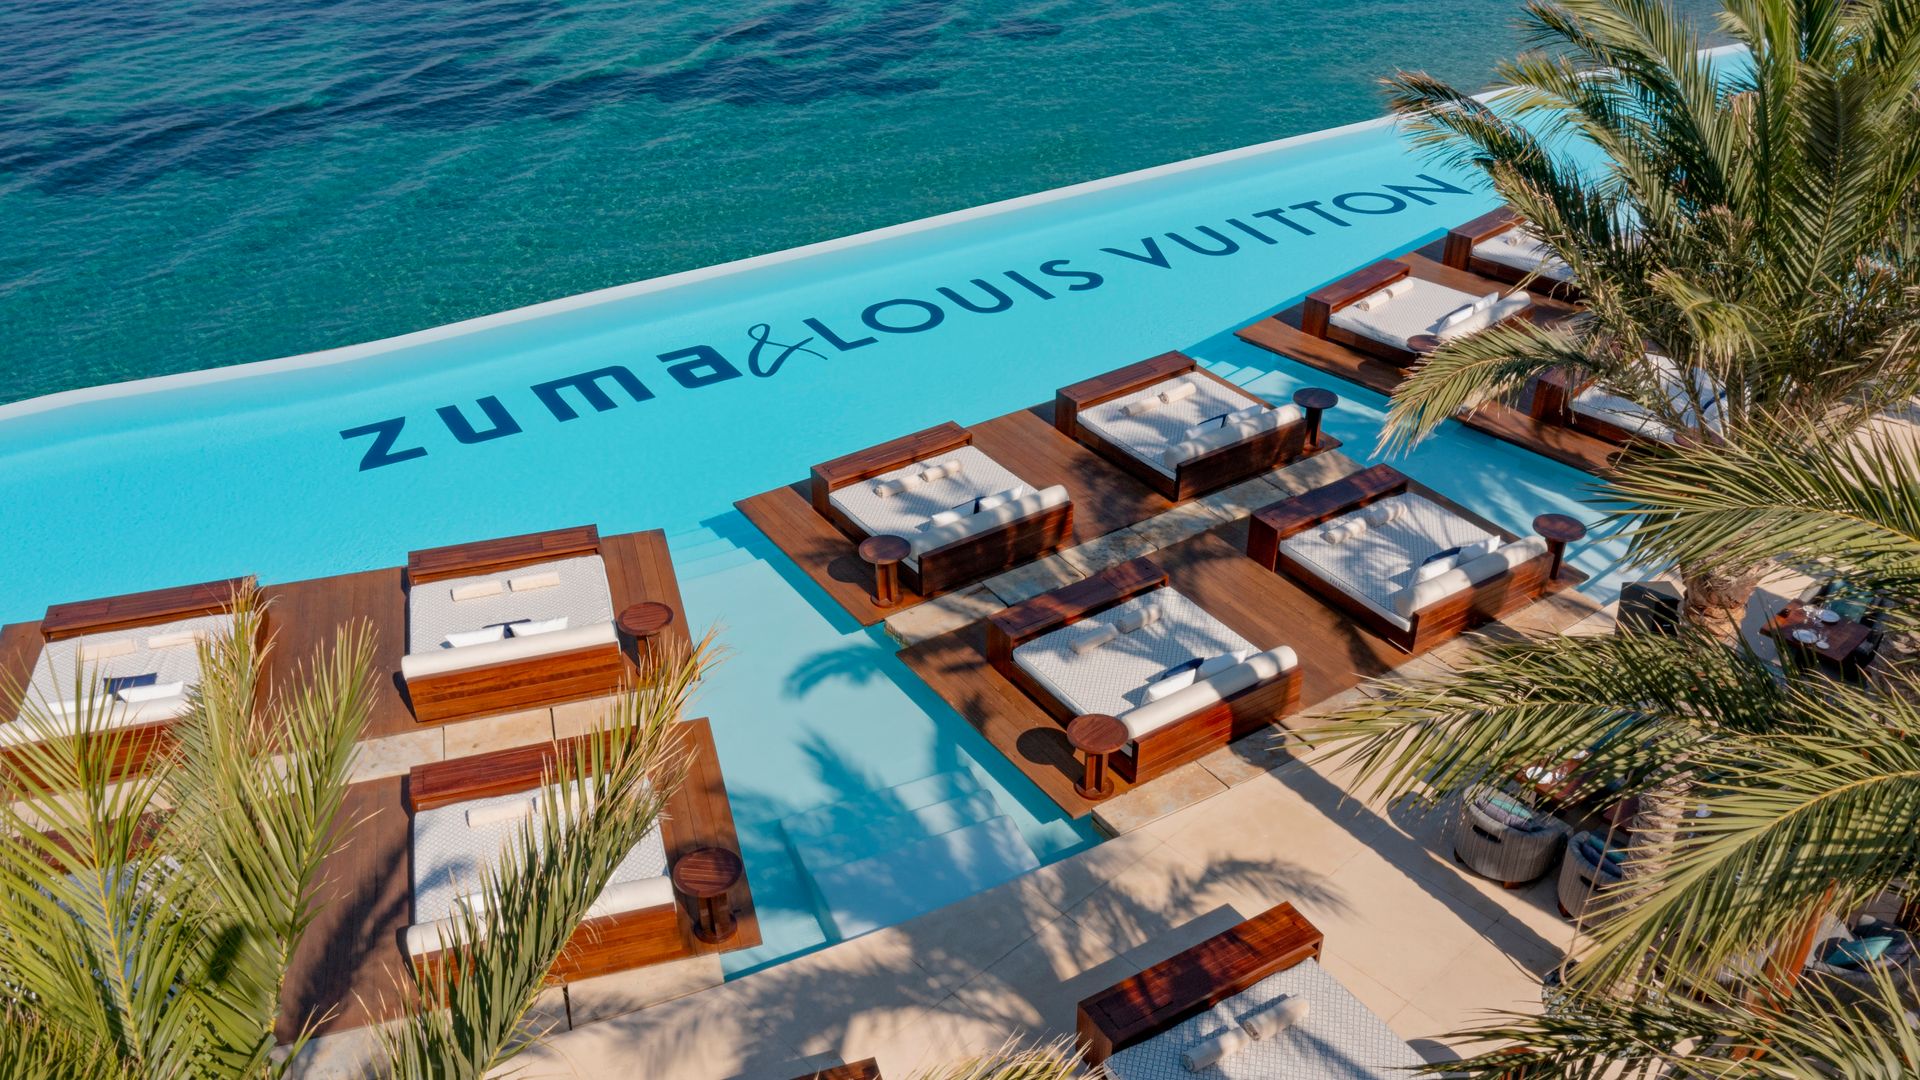 You Can Now Shop Exclusive Items From Louis Vuitton At This Luxury Resort